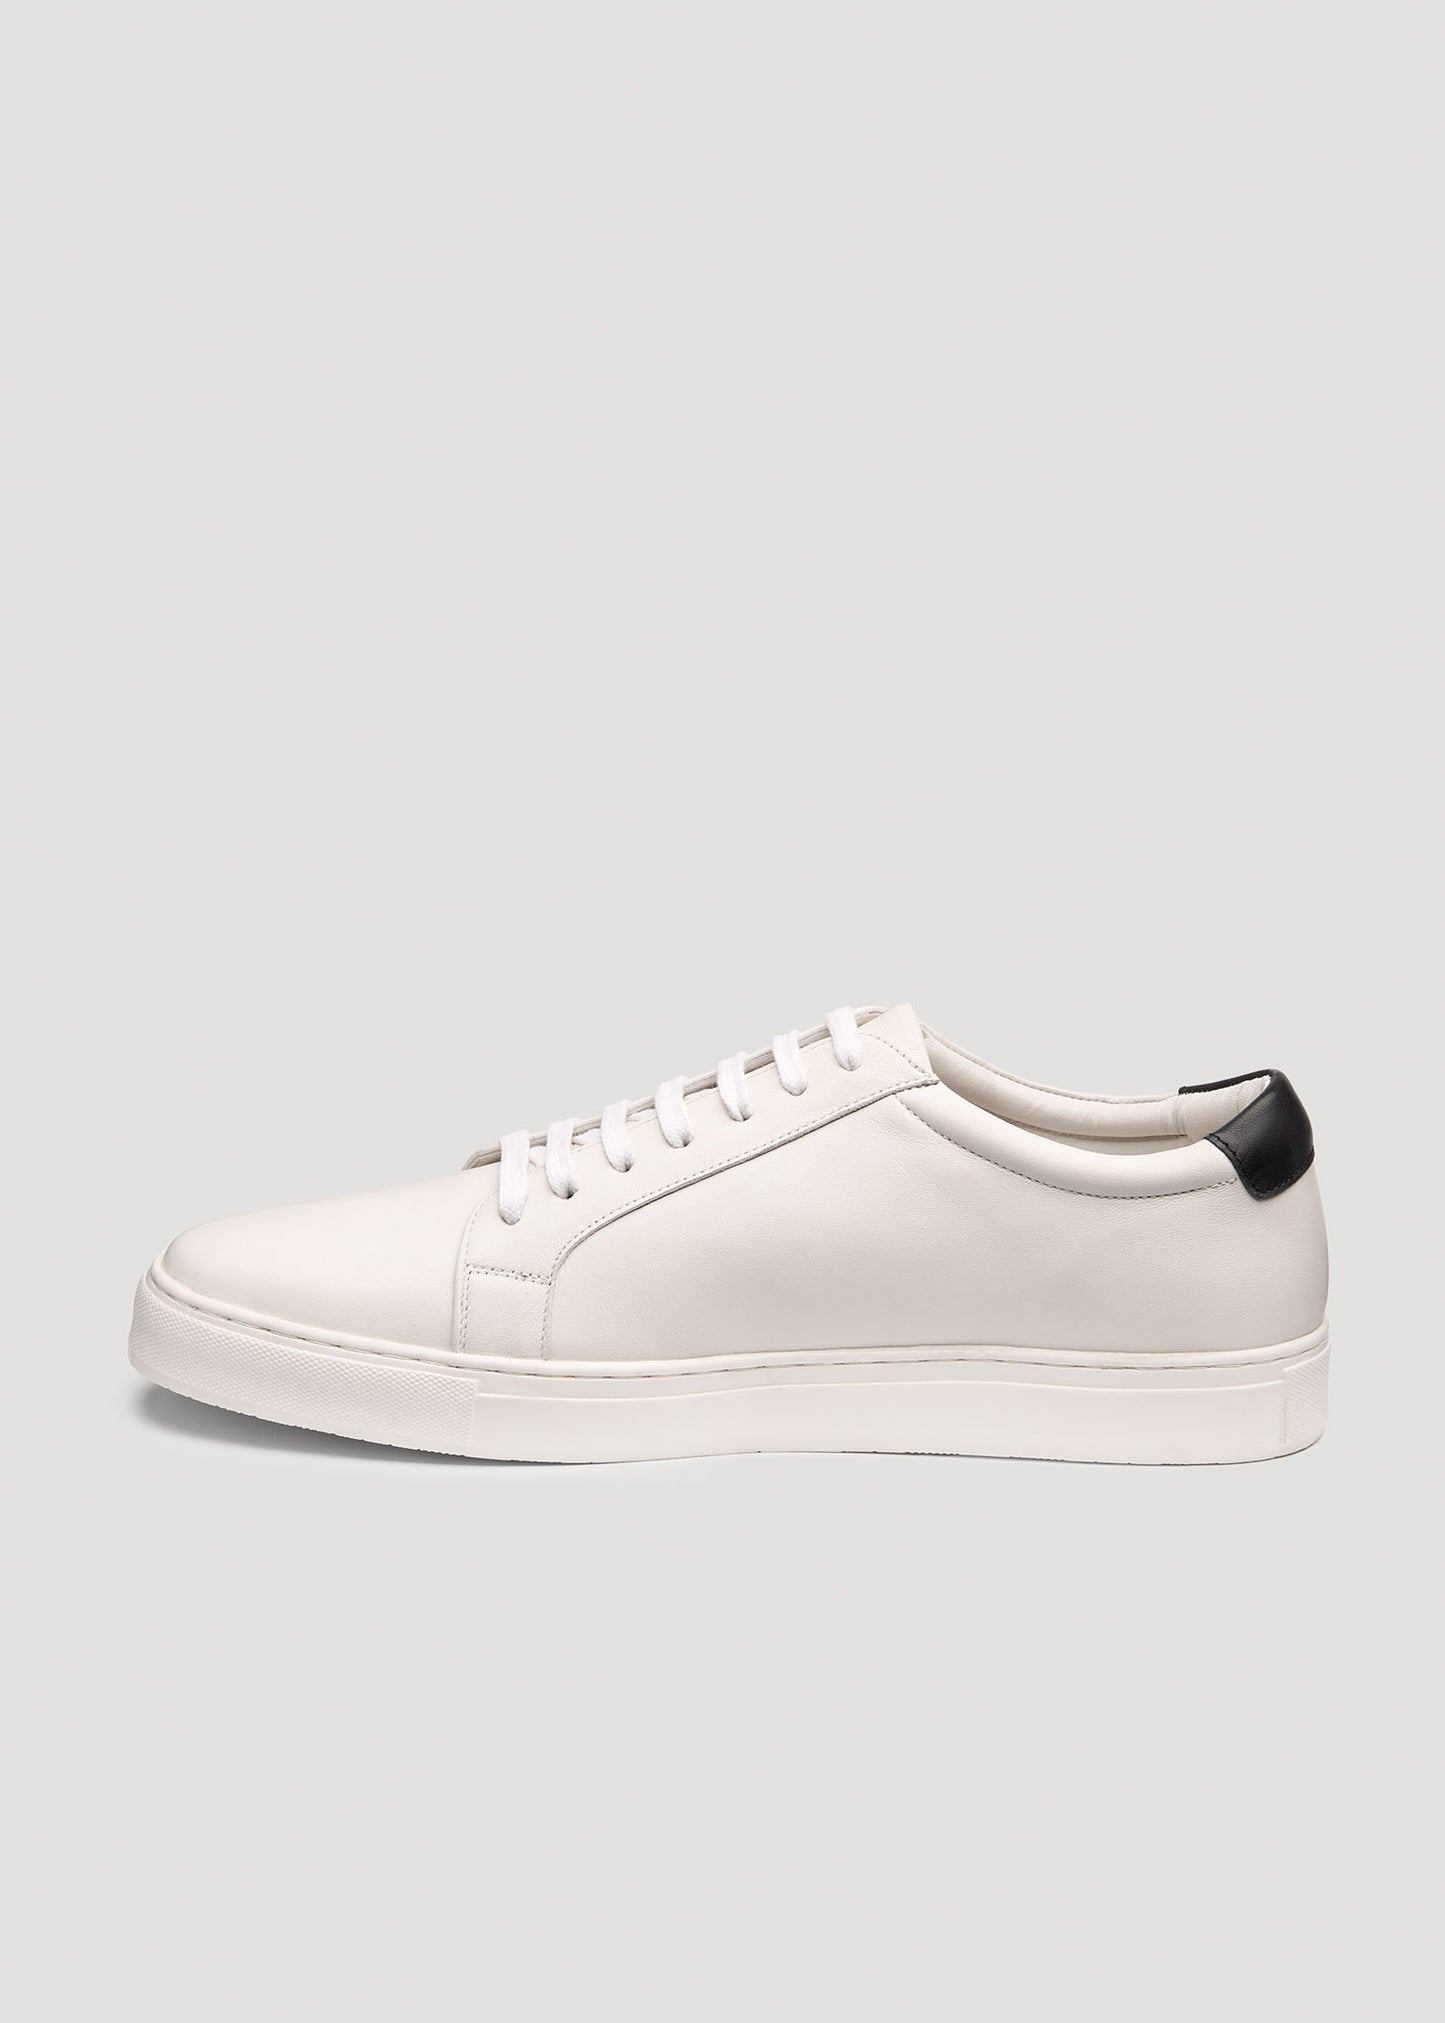 Tall Men’s Cupsole Tennis Sneakers in White